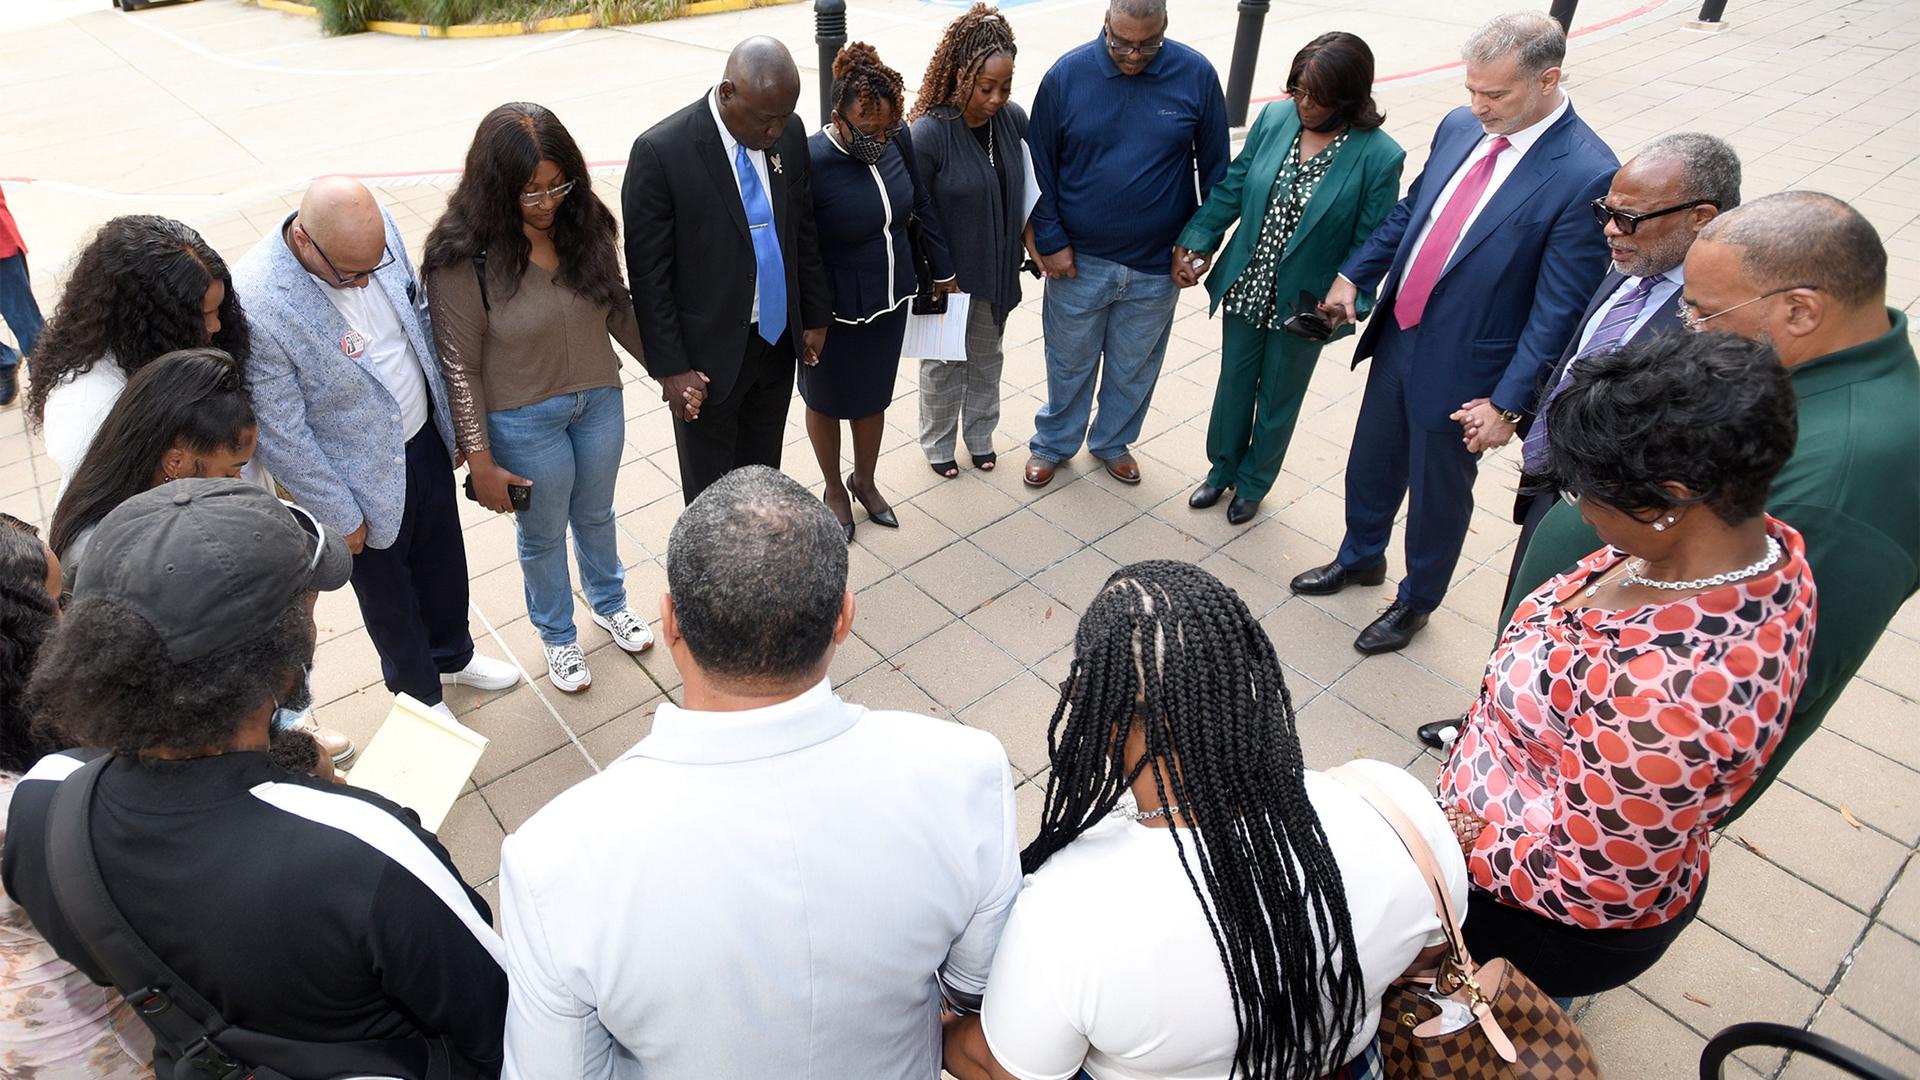 Descendants of Henrietta Lacks, whose cells, known as HeLa cells, have been used in medical research without her permission, say a prayer with attorneys outside the federal courthouse in Baltimore